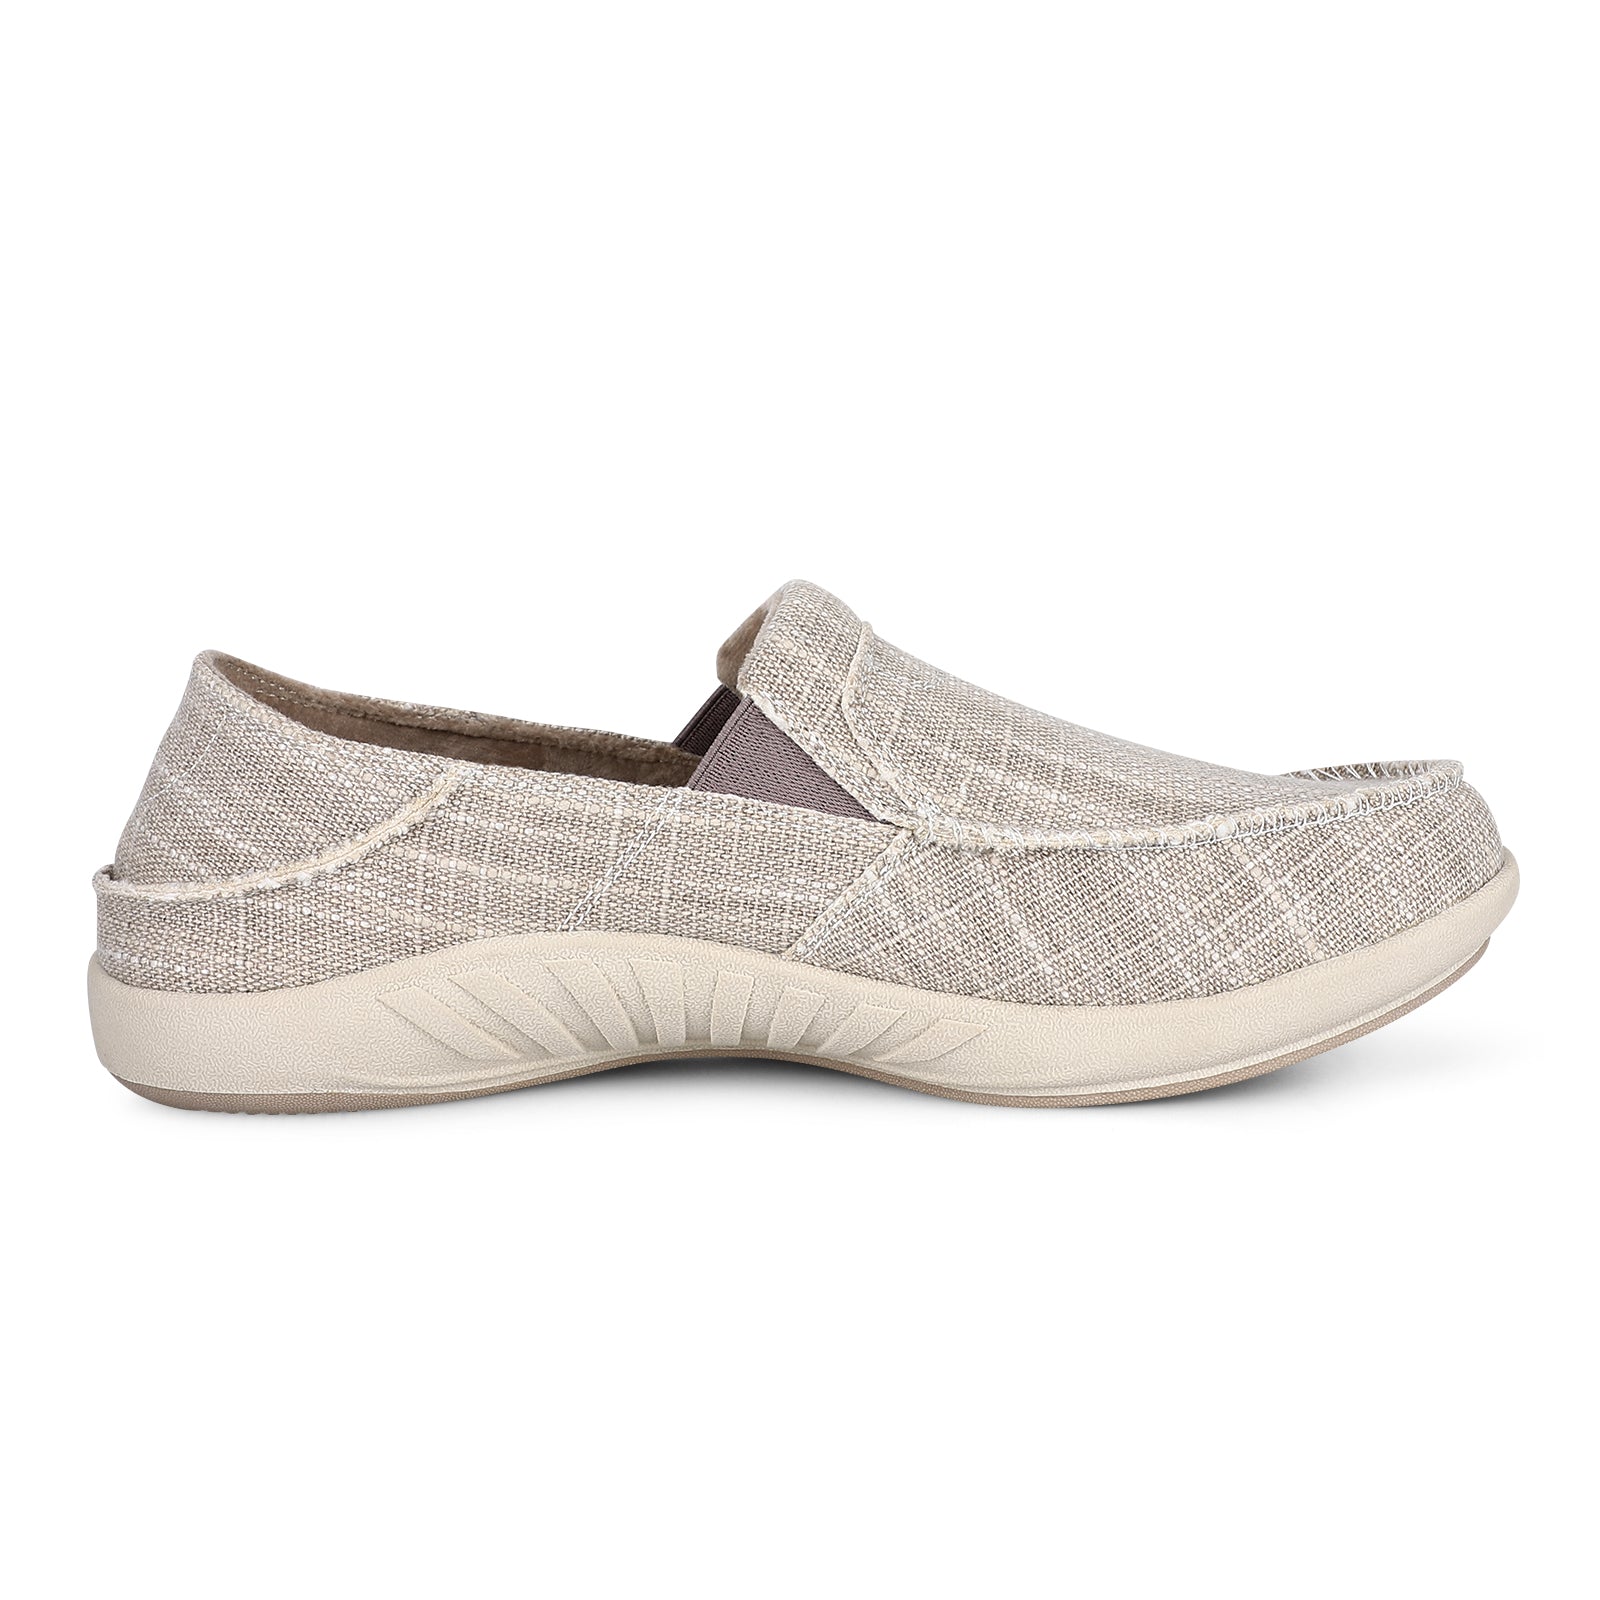 Arch Support Matters: Finding the Ideal Walking Shoes for Flat Feet